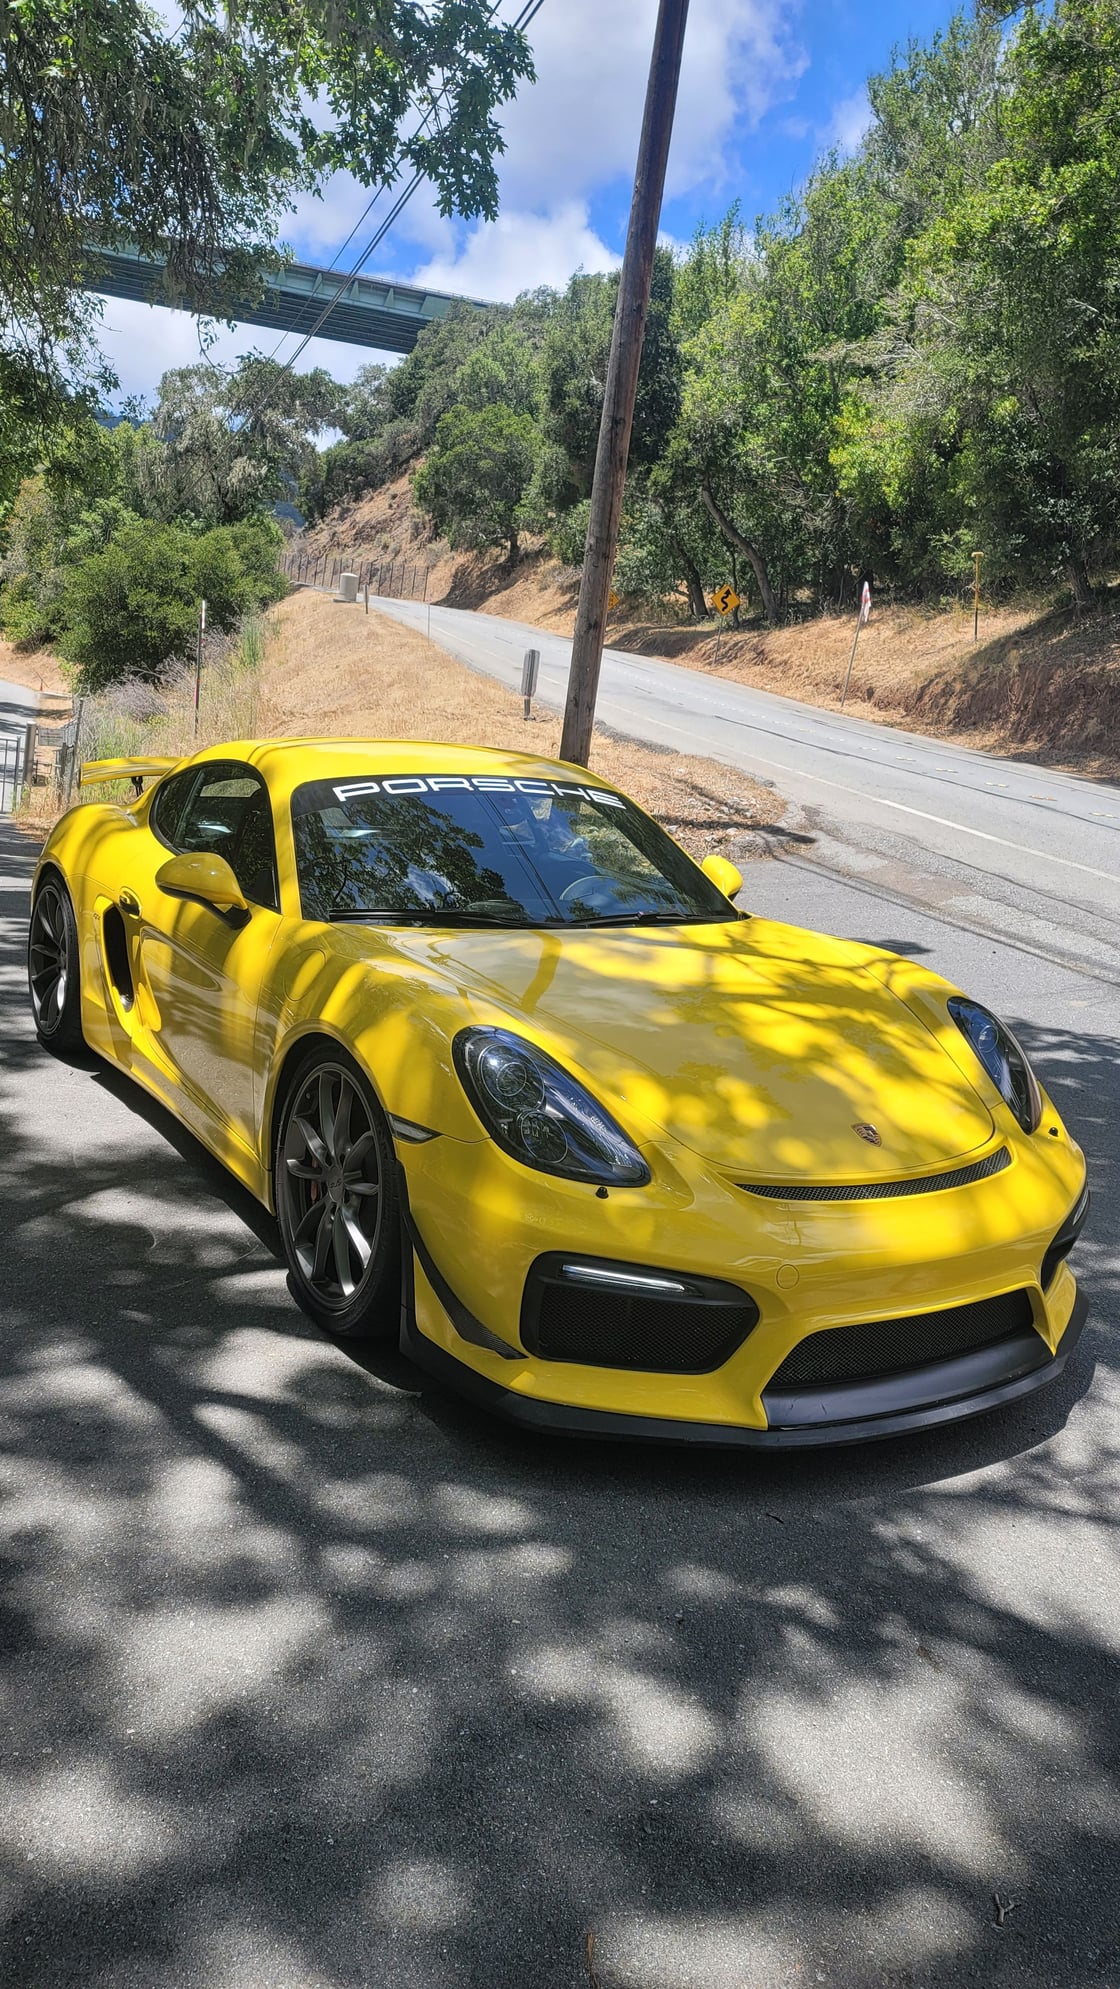 2016 Porsche Cayman GT4 - 2016 981 GT4 (Yellow) - 2nd Owner (California car) - Used - VIN clean carfax - 19,800 Miles - 6 cyl - 2WD - Manual - Coupe - Yellow - Millbrae, CA 94030, United States